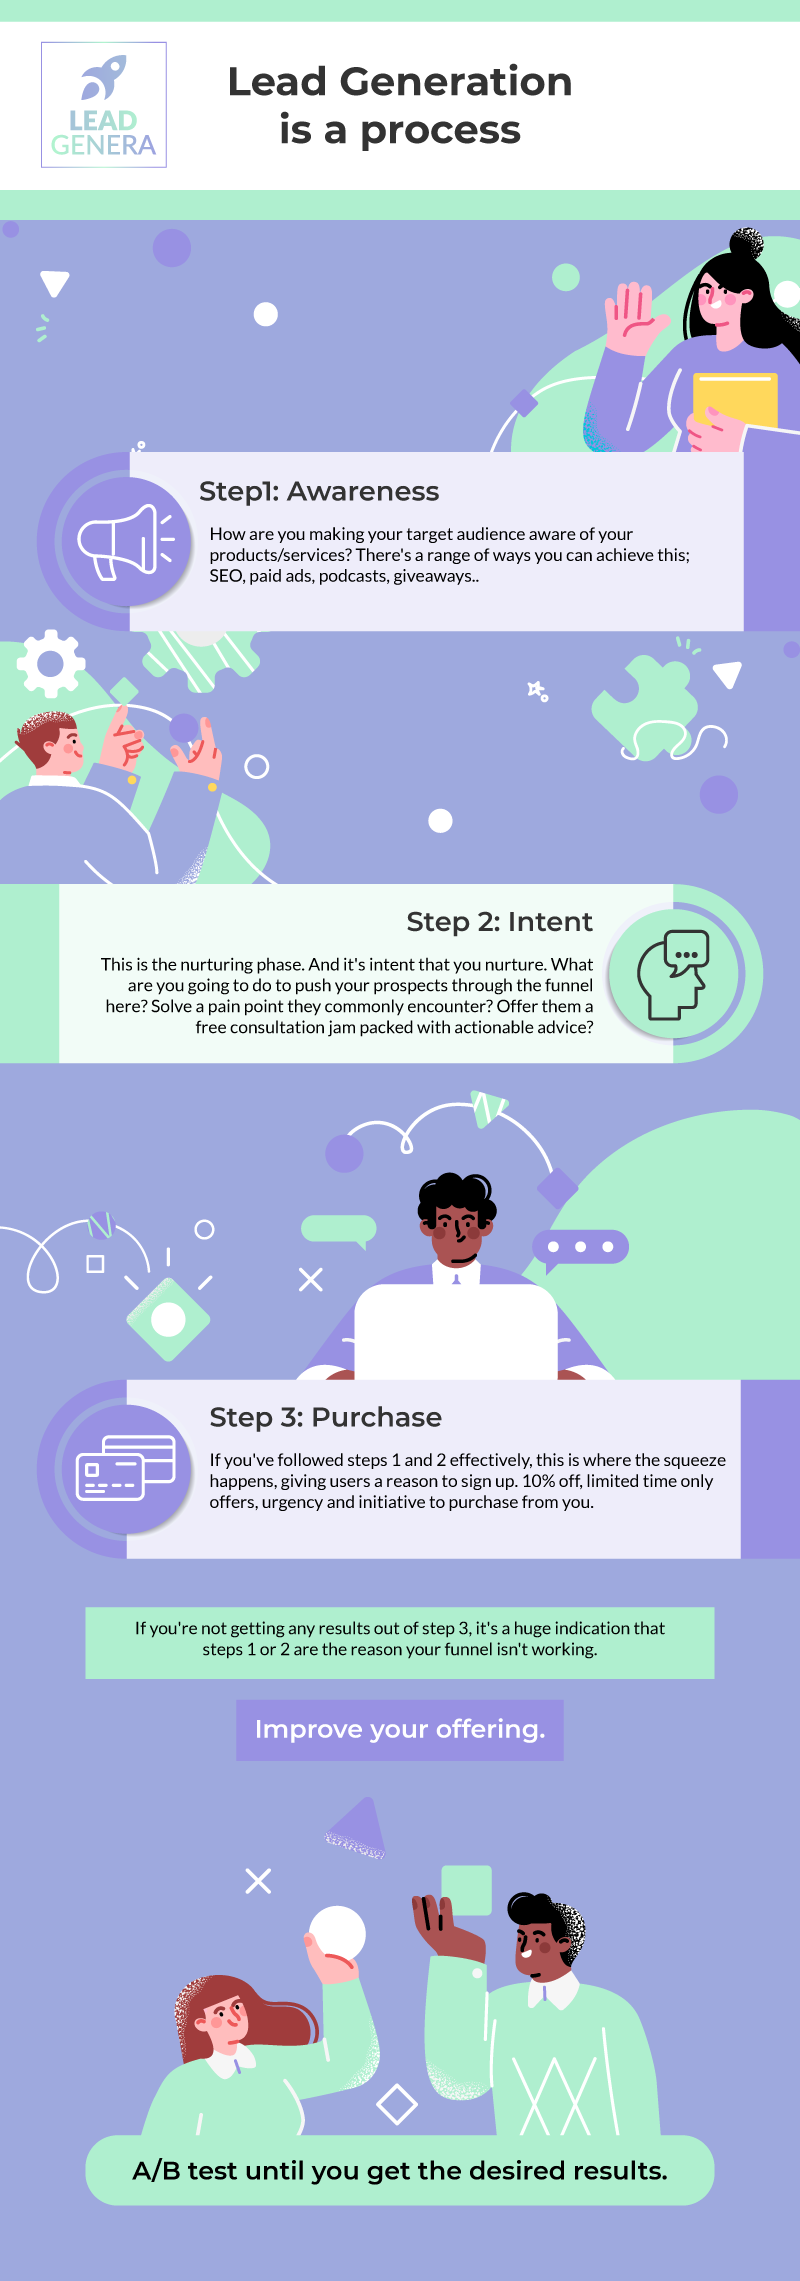 Lead Generation Funnels - How To Create A Lead Generation Funnel - Infographic by Lead Genera